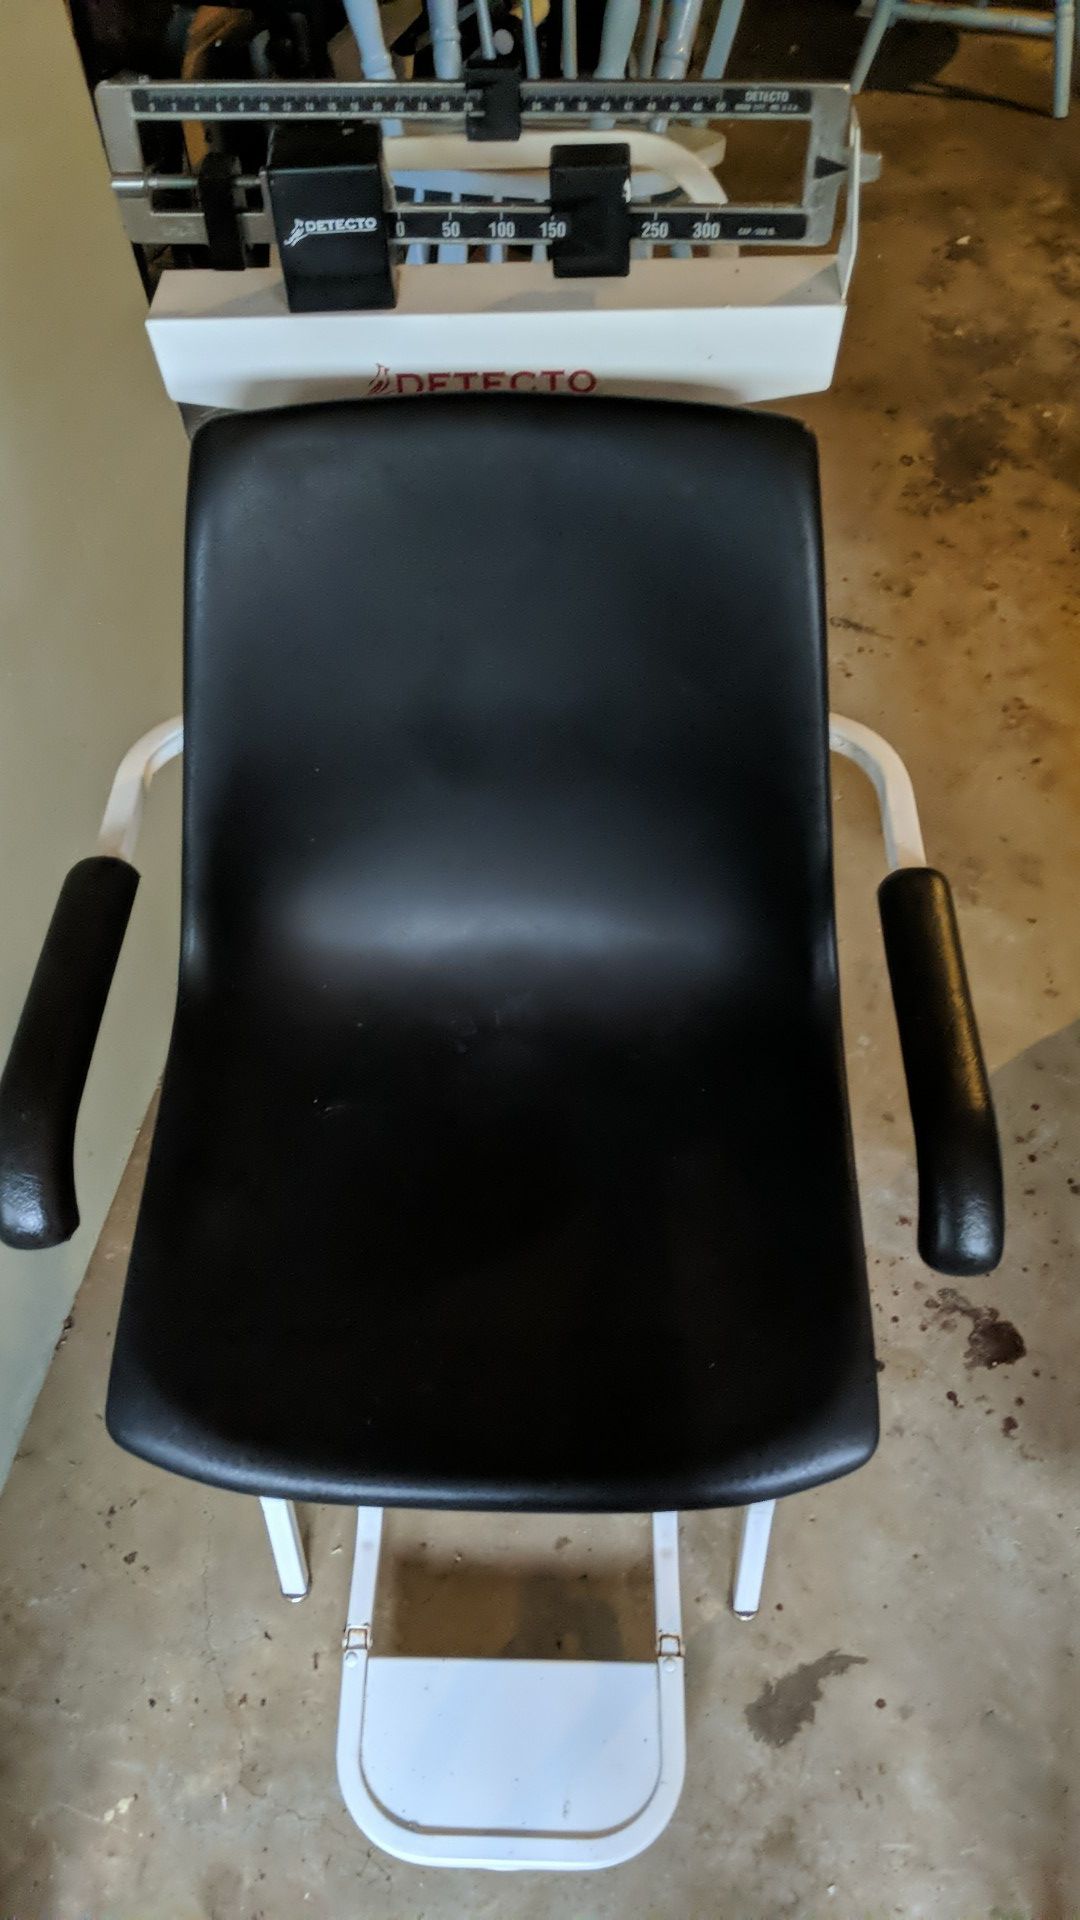 Detecto rolling weight scale chair